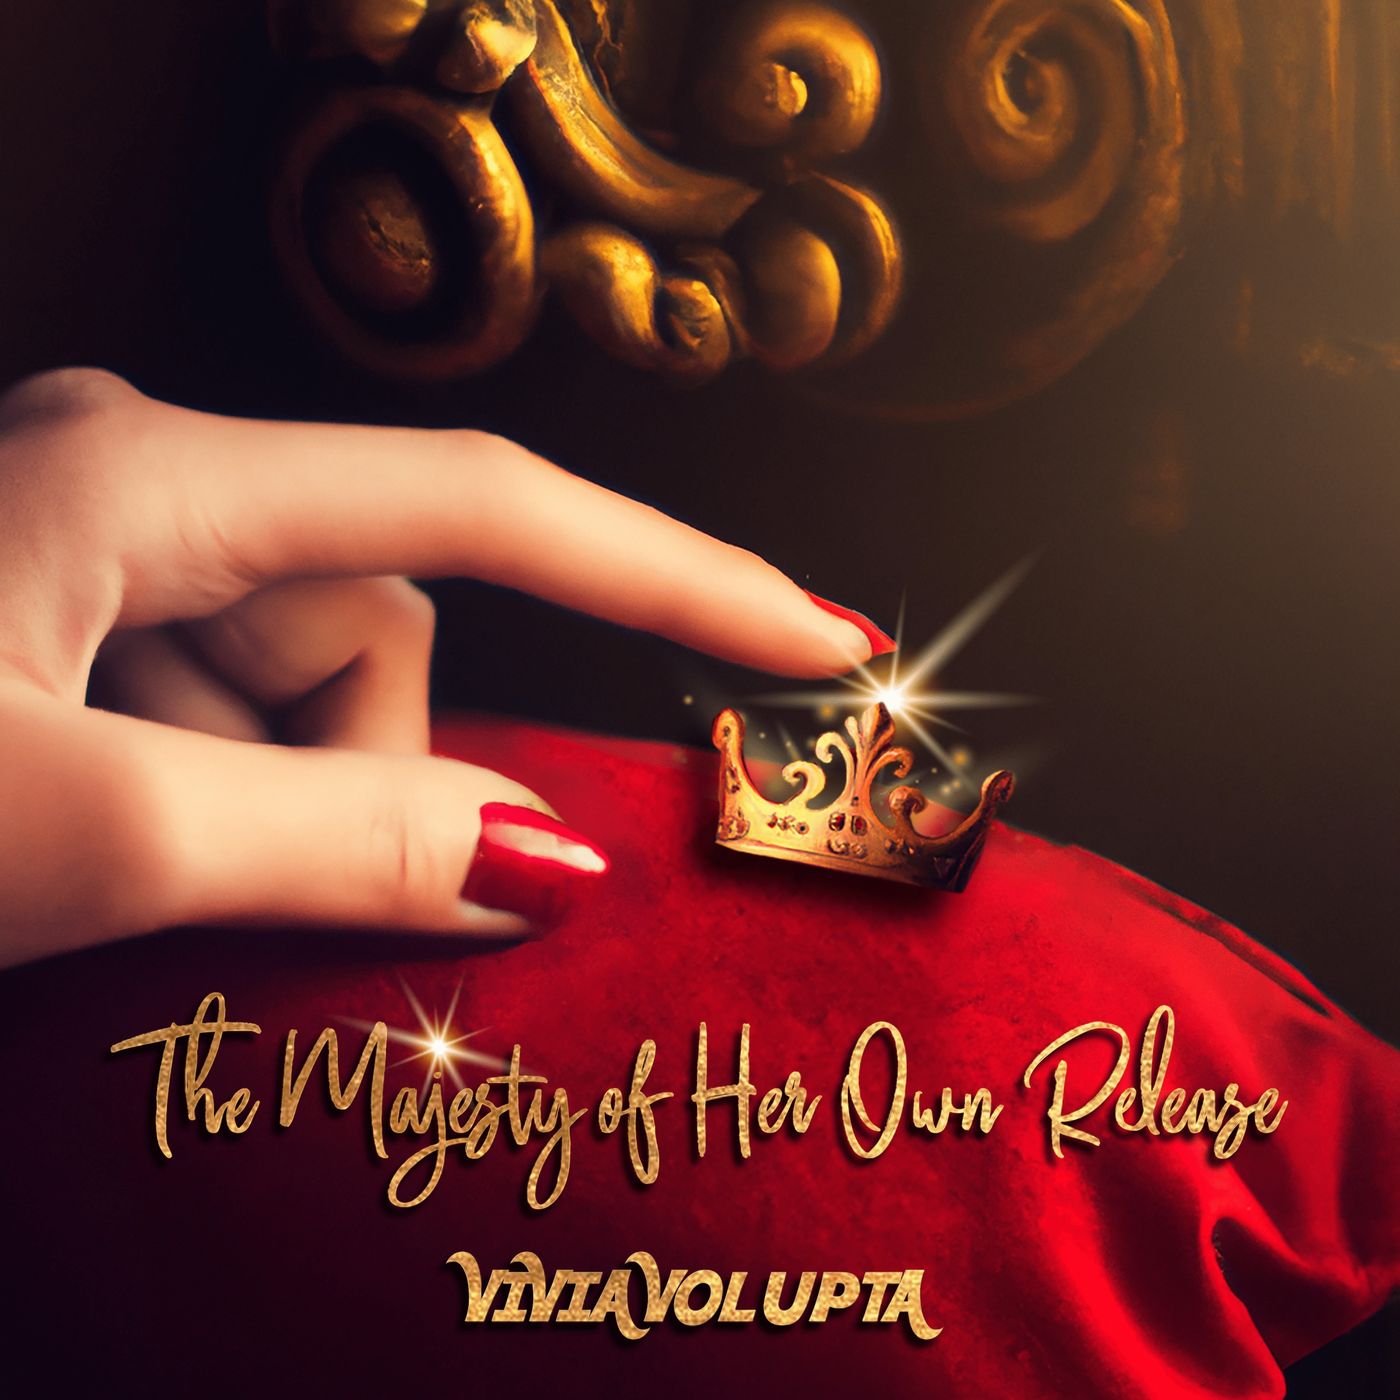 The Majesty of Her Own Release - A Sensual Intimate Poem